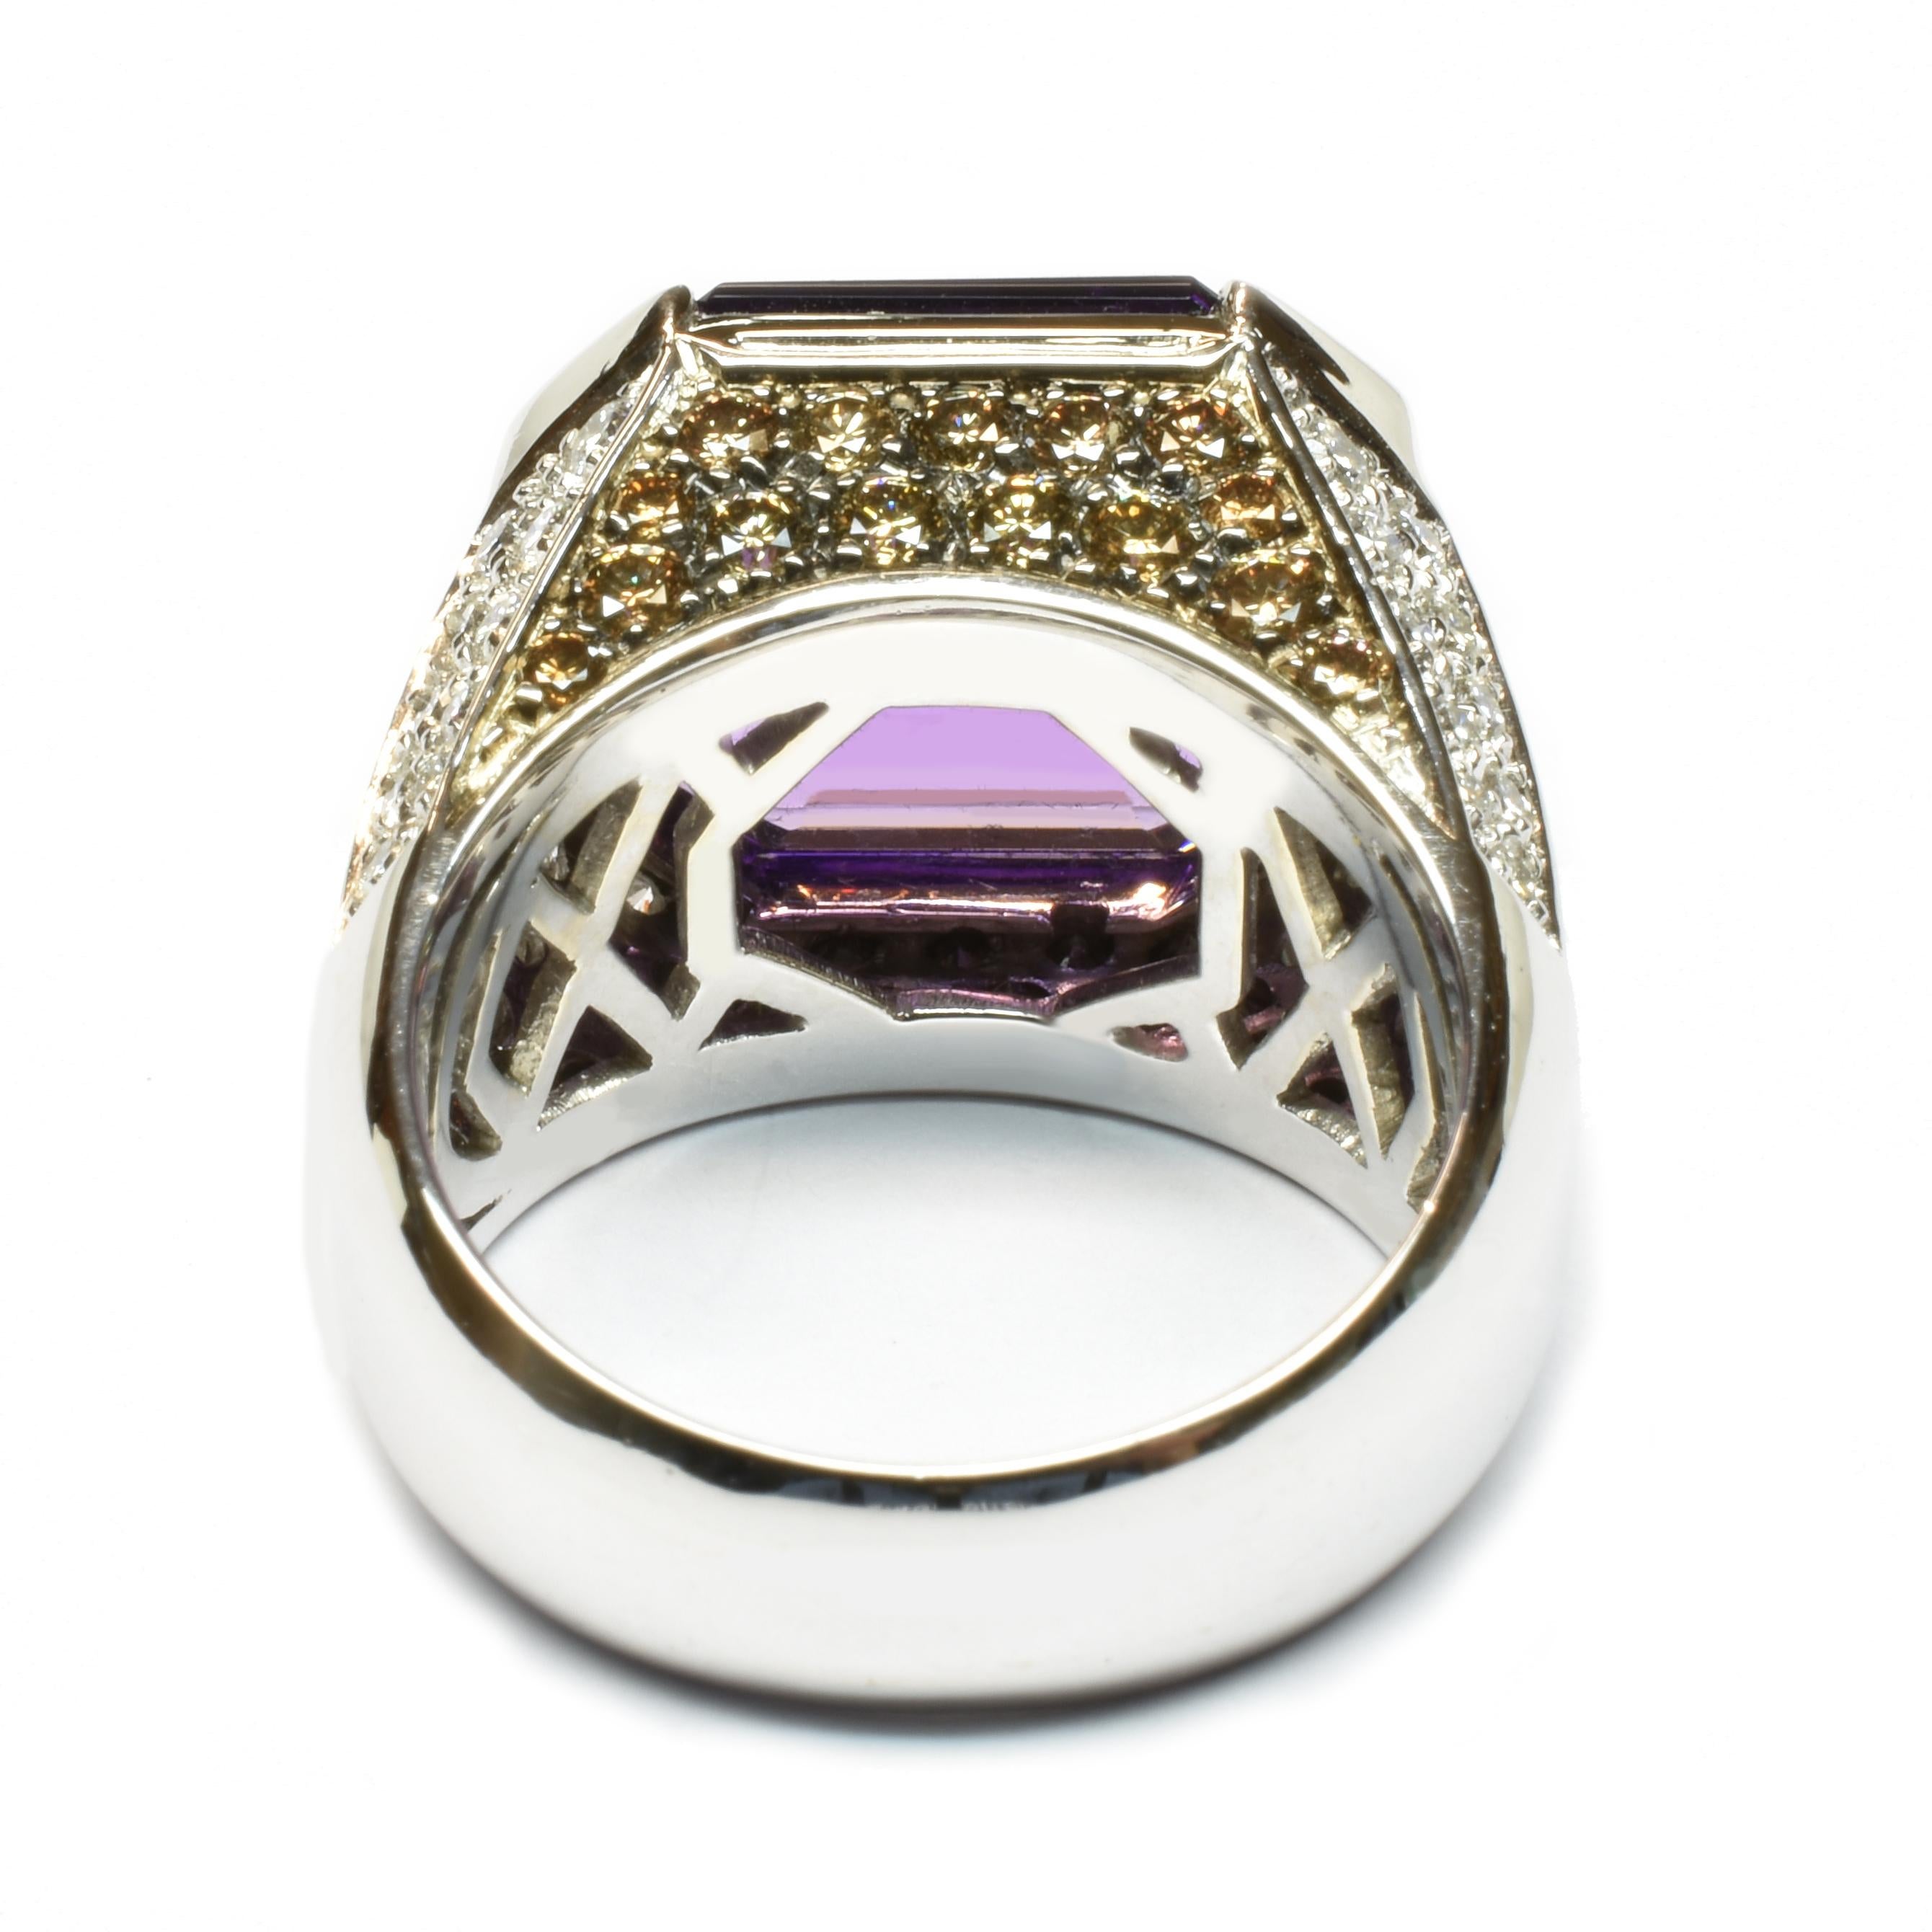 Emerald Cut Octagonal Shaped Amethyst and Diamonds Gold Ring Made in Italy For Sale